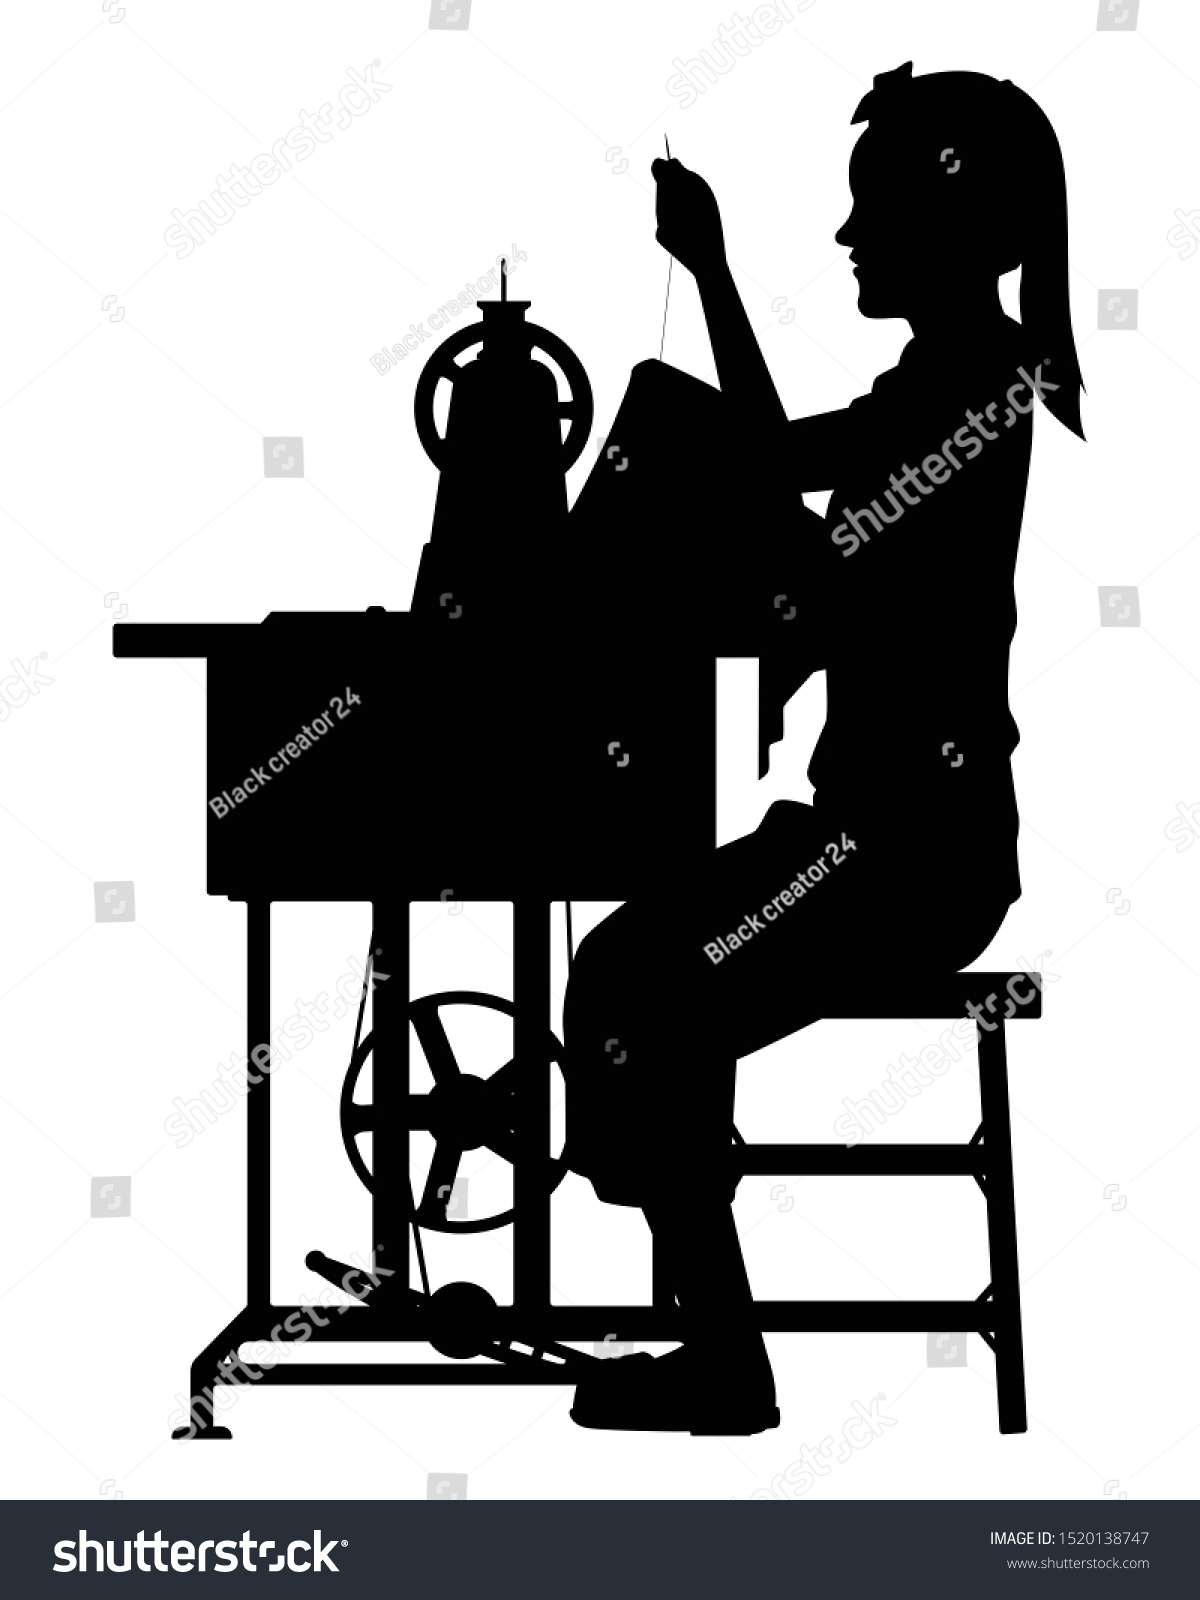 Female Dressmaker With Sewing Machine Silhouette Royalty Free Stock Vector 1520138747 